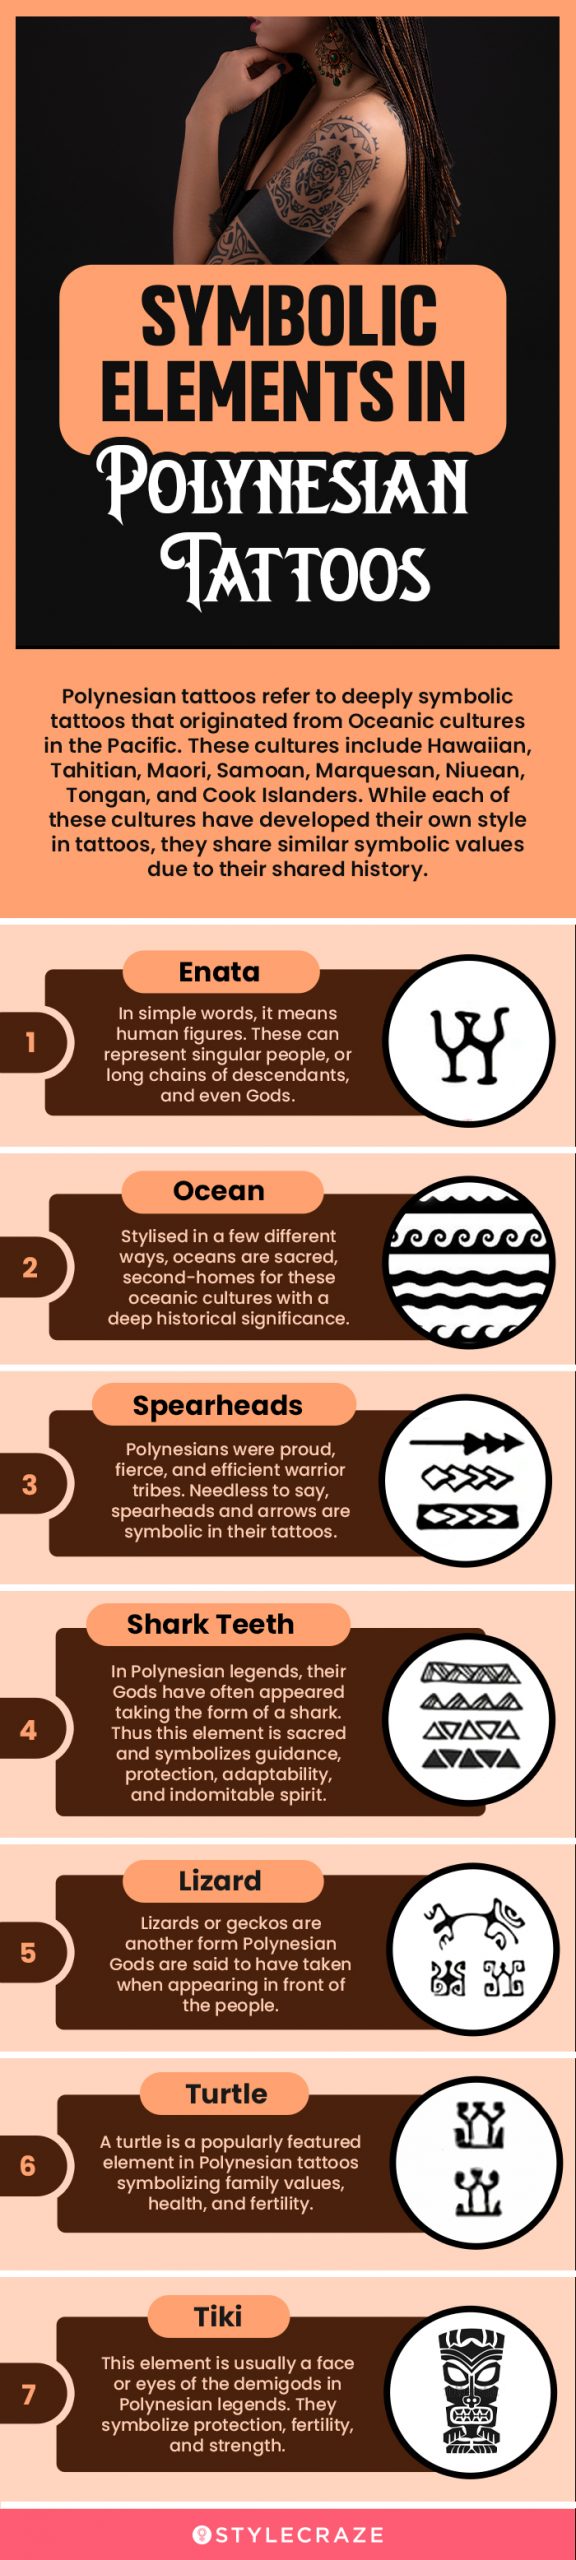 symbolic elements in polynesian tattoos [infographic]